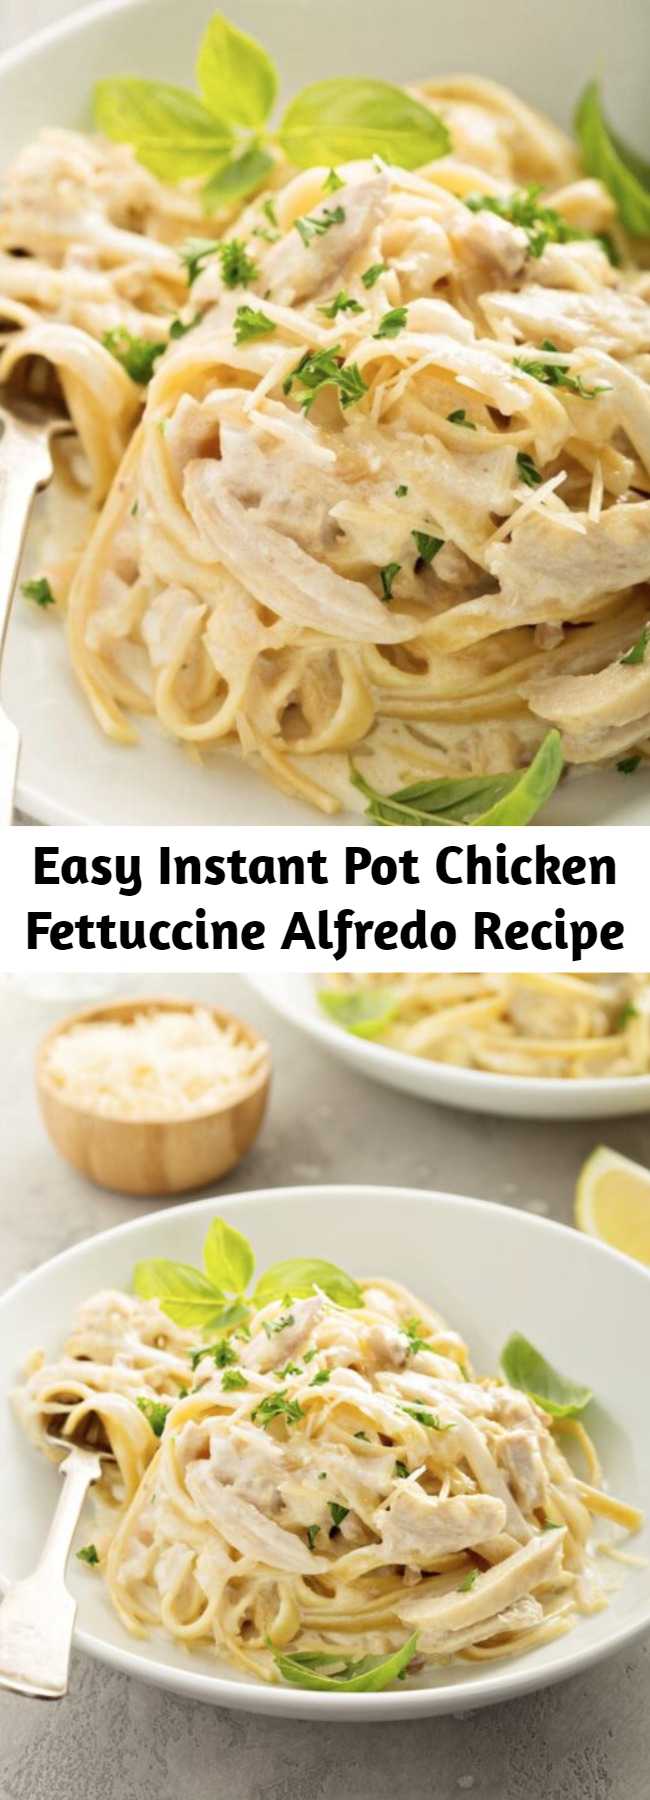 Easy Instant Pot Chicken Fettuccine Alfredo Recipe - When made in the instant pot, this Instant Pot Chicken Fettuccine Alfredo becomes a one pot pasta recipe that couldn't be any easier or more delicious! #InstantPot #OnePot #Pasta